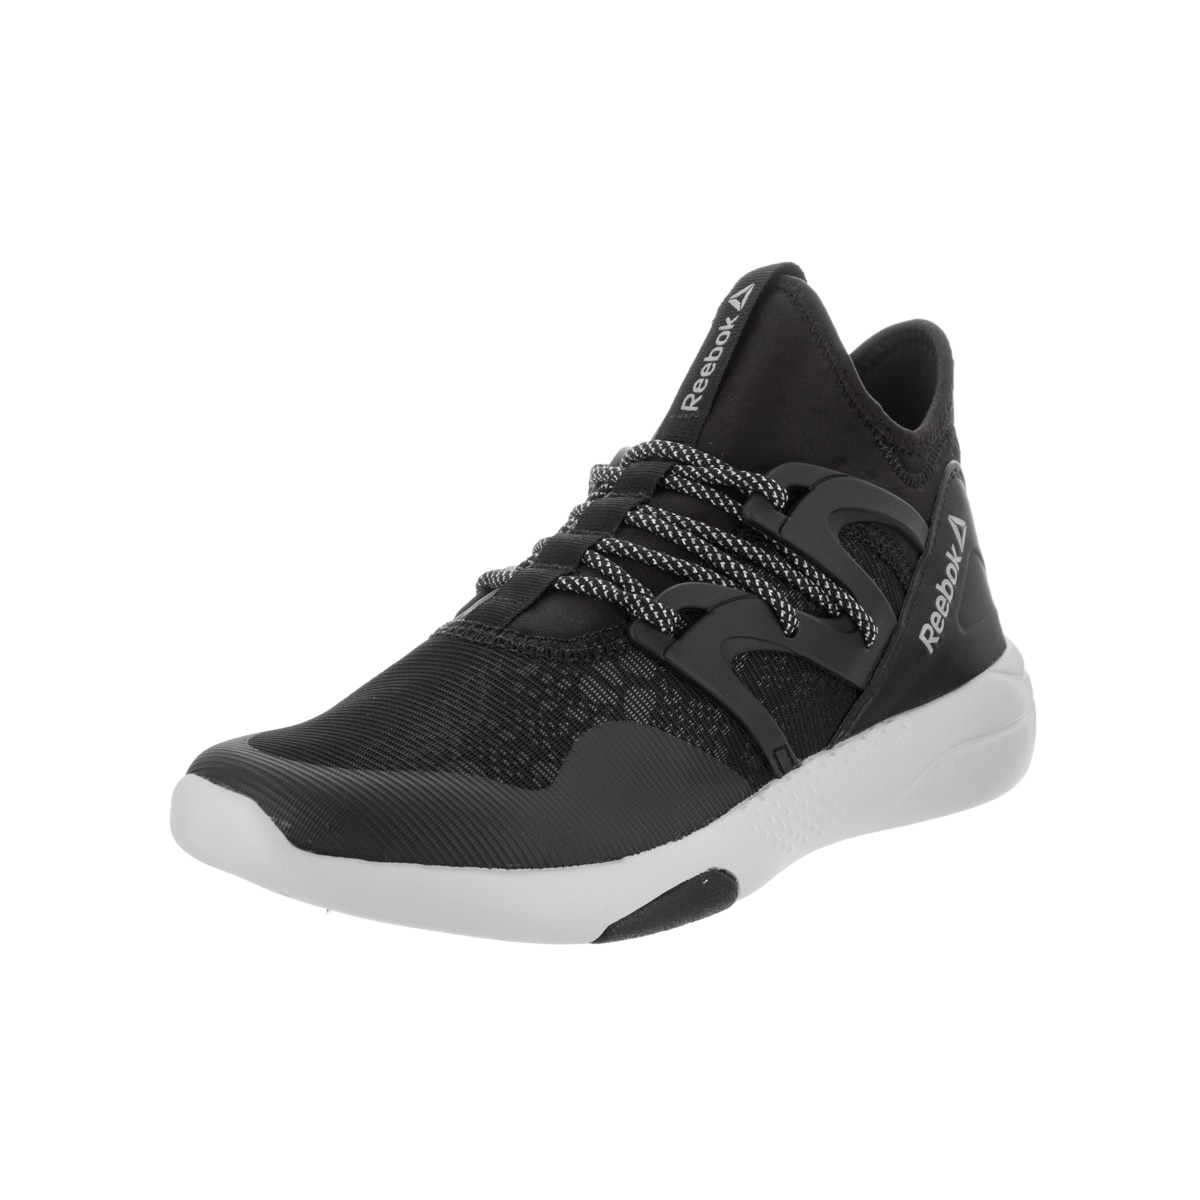 reebok black synthetic leather sport shoes